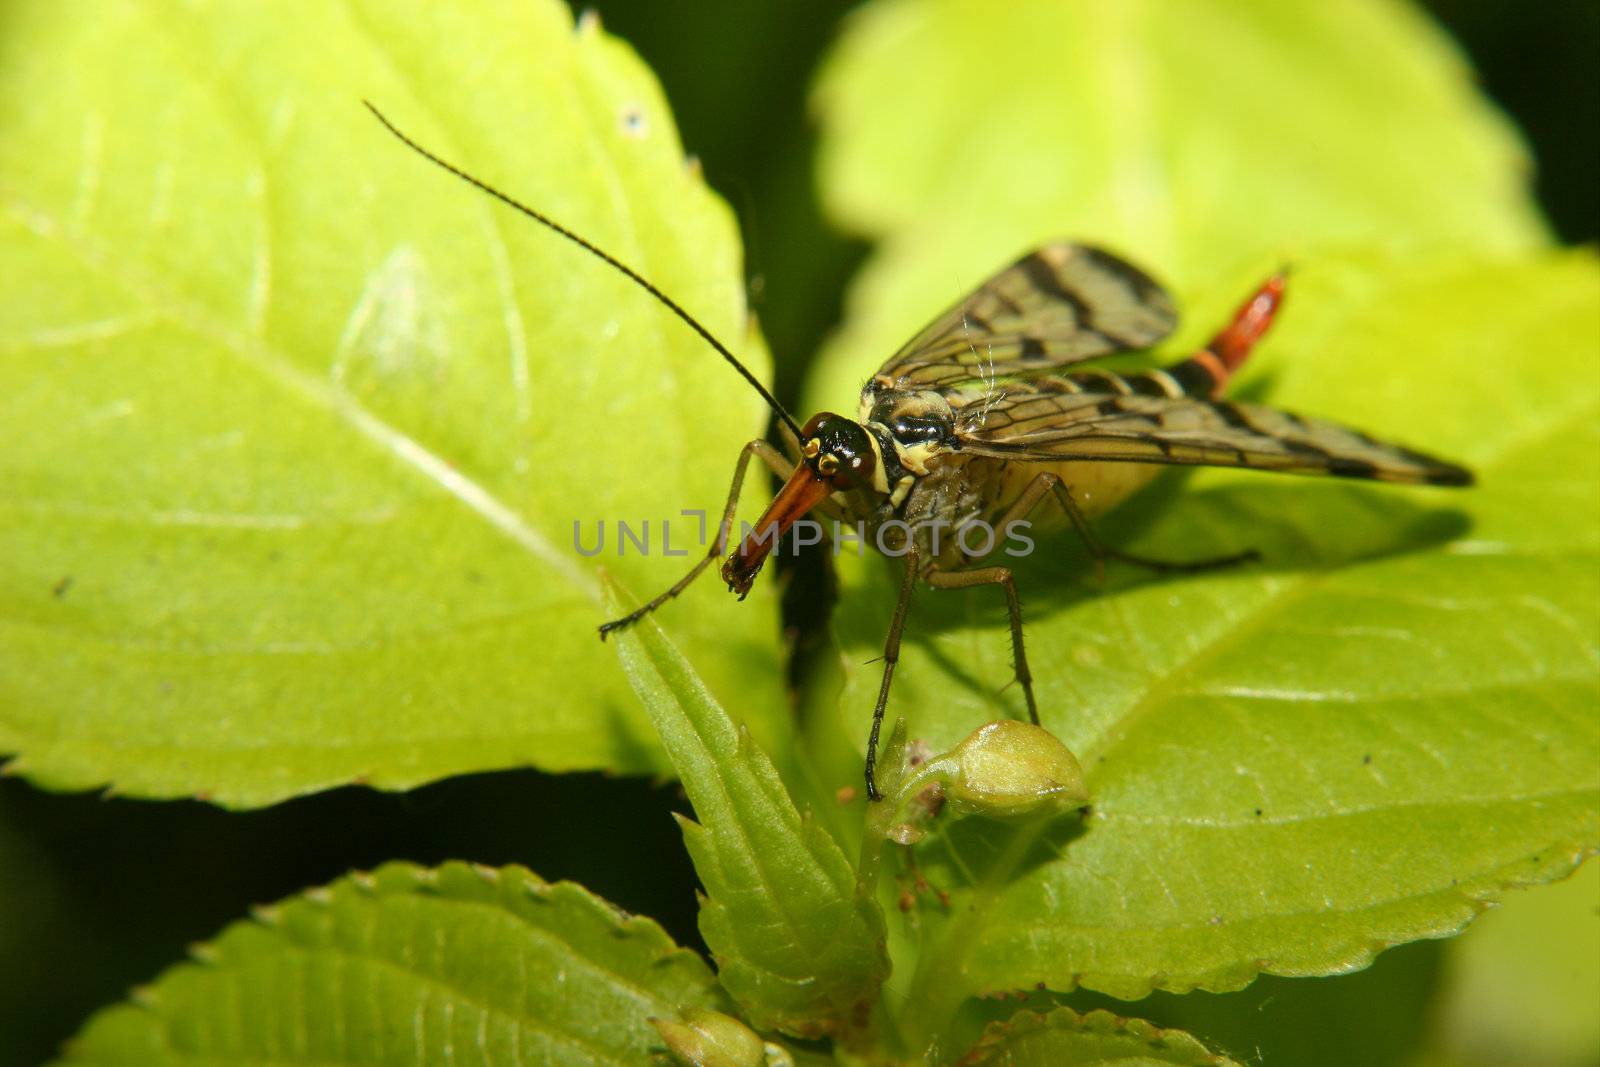 Common Scorpionfly (Panorpa communis) - female on a leaf